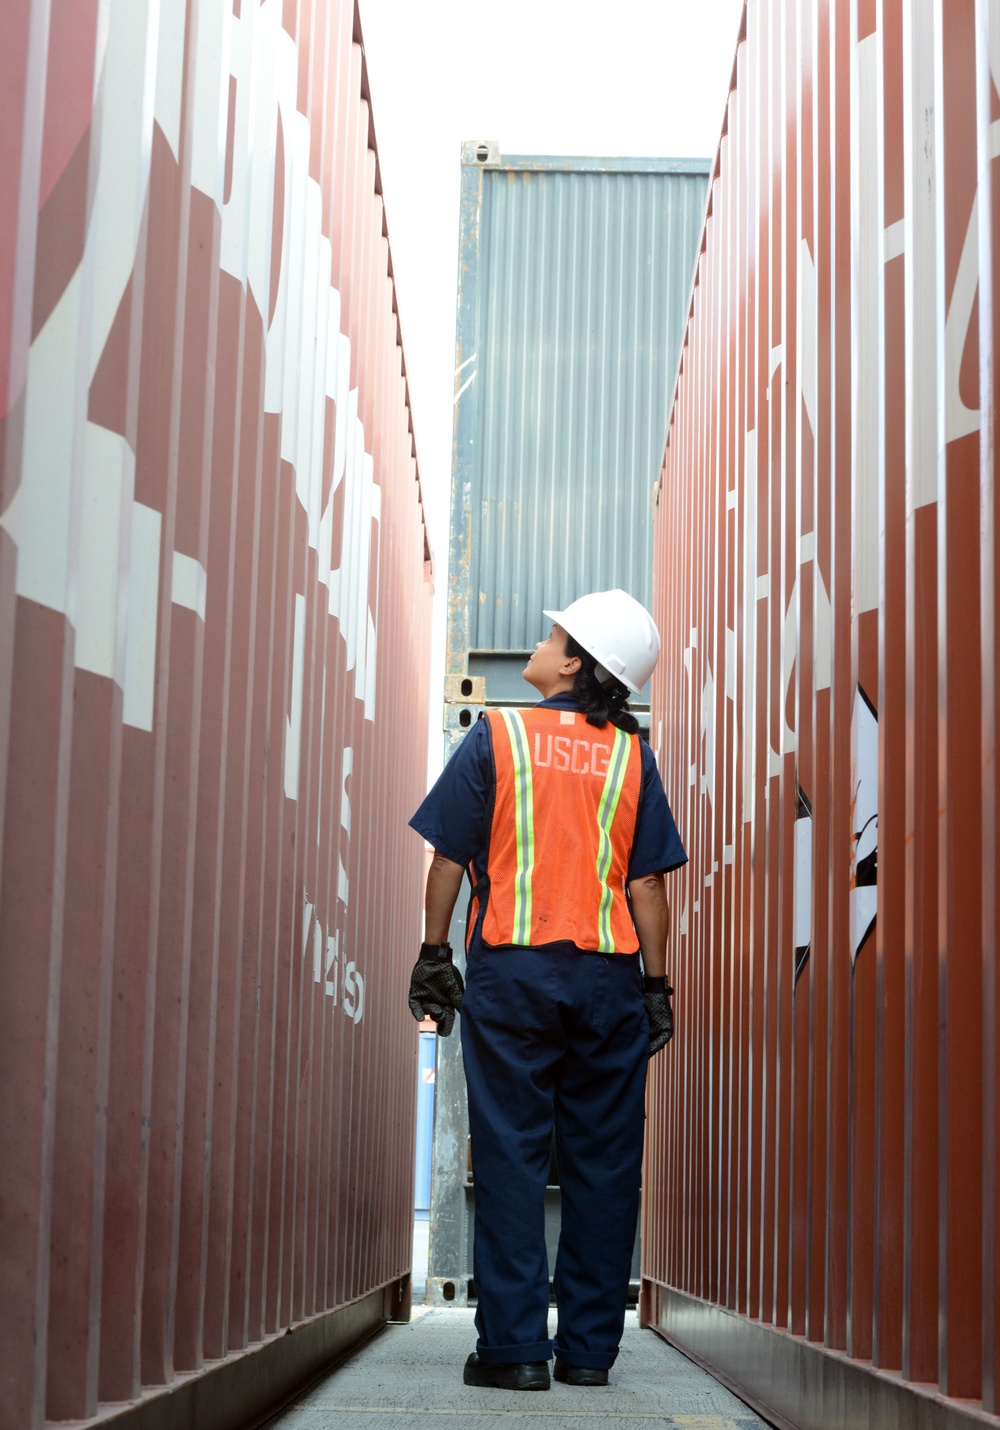 Coast Guard conducts container inspection training at Port of Honolulu